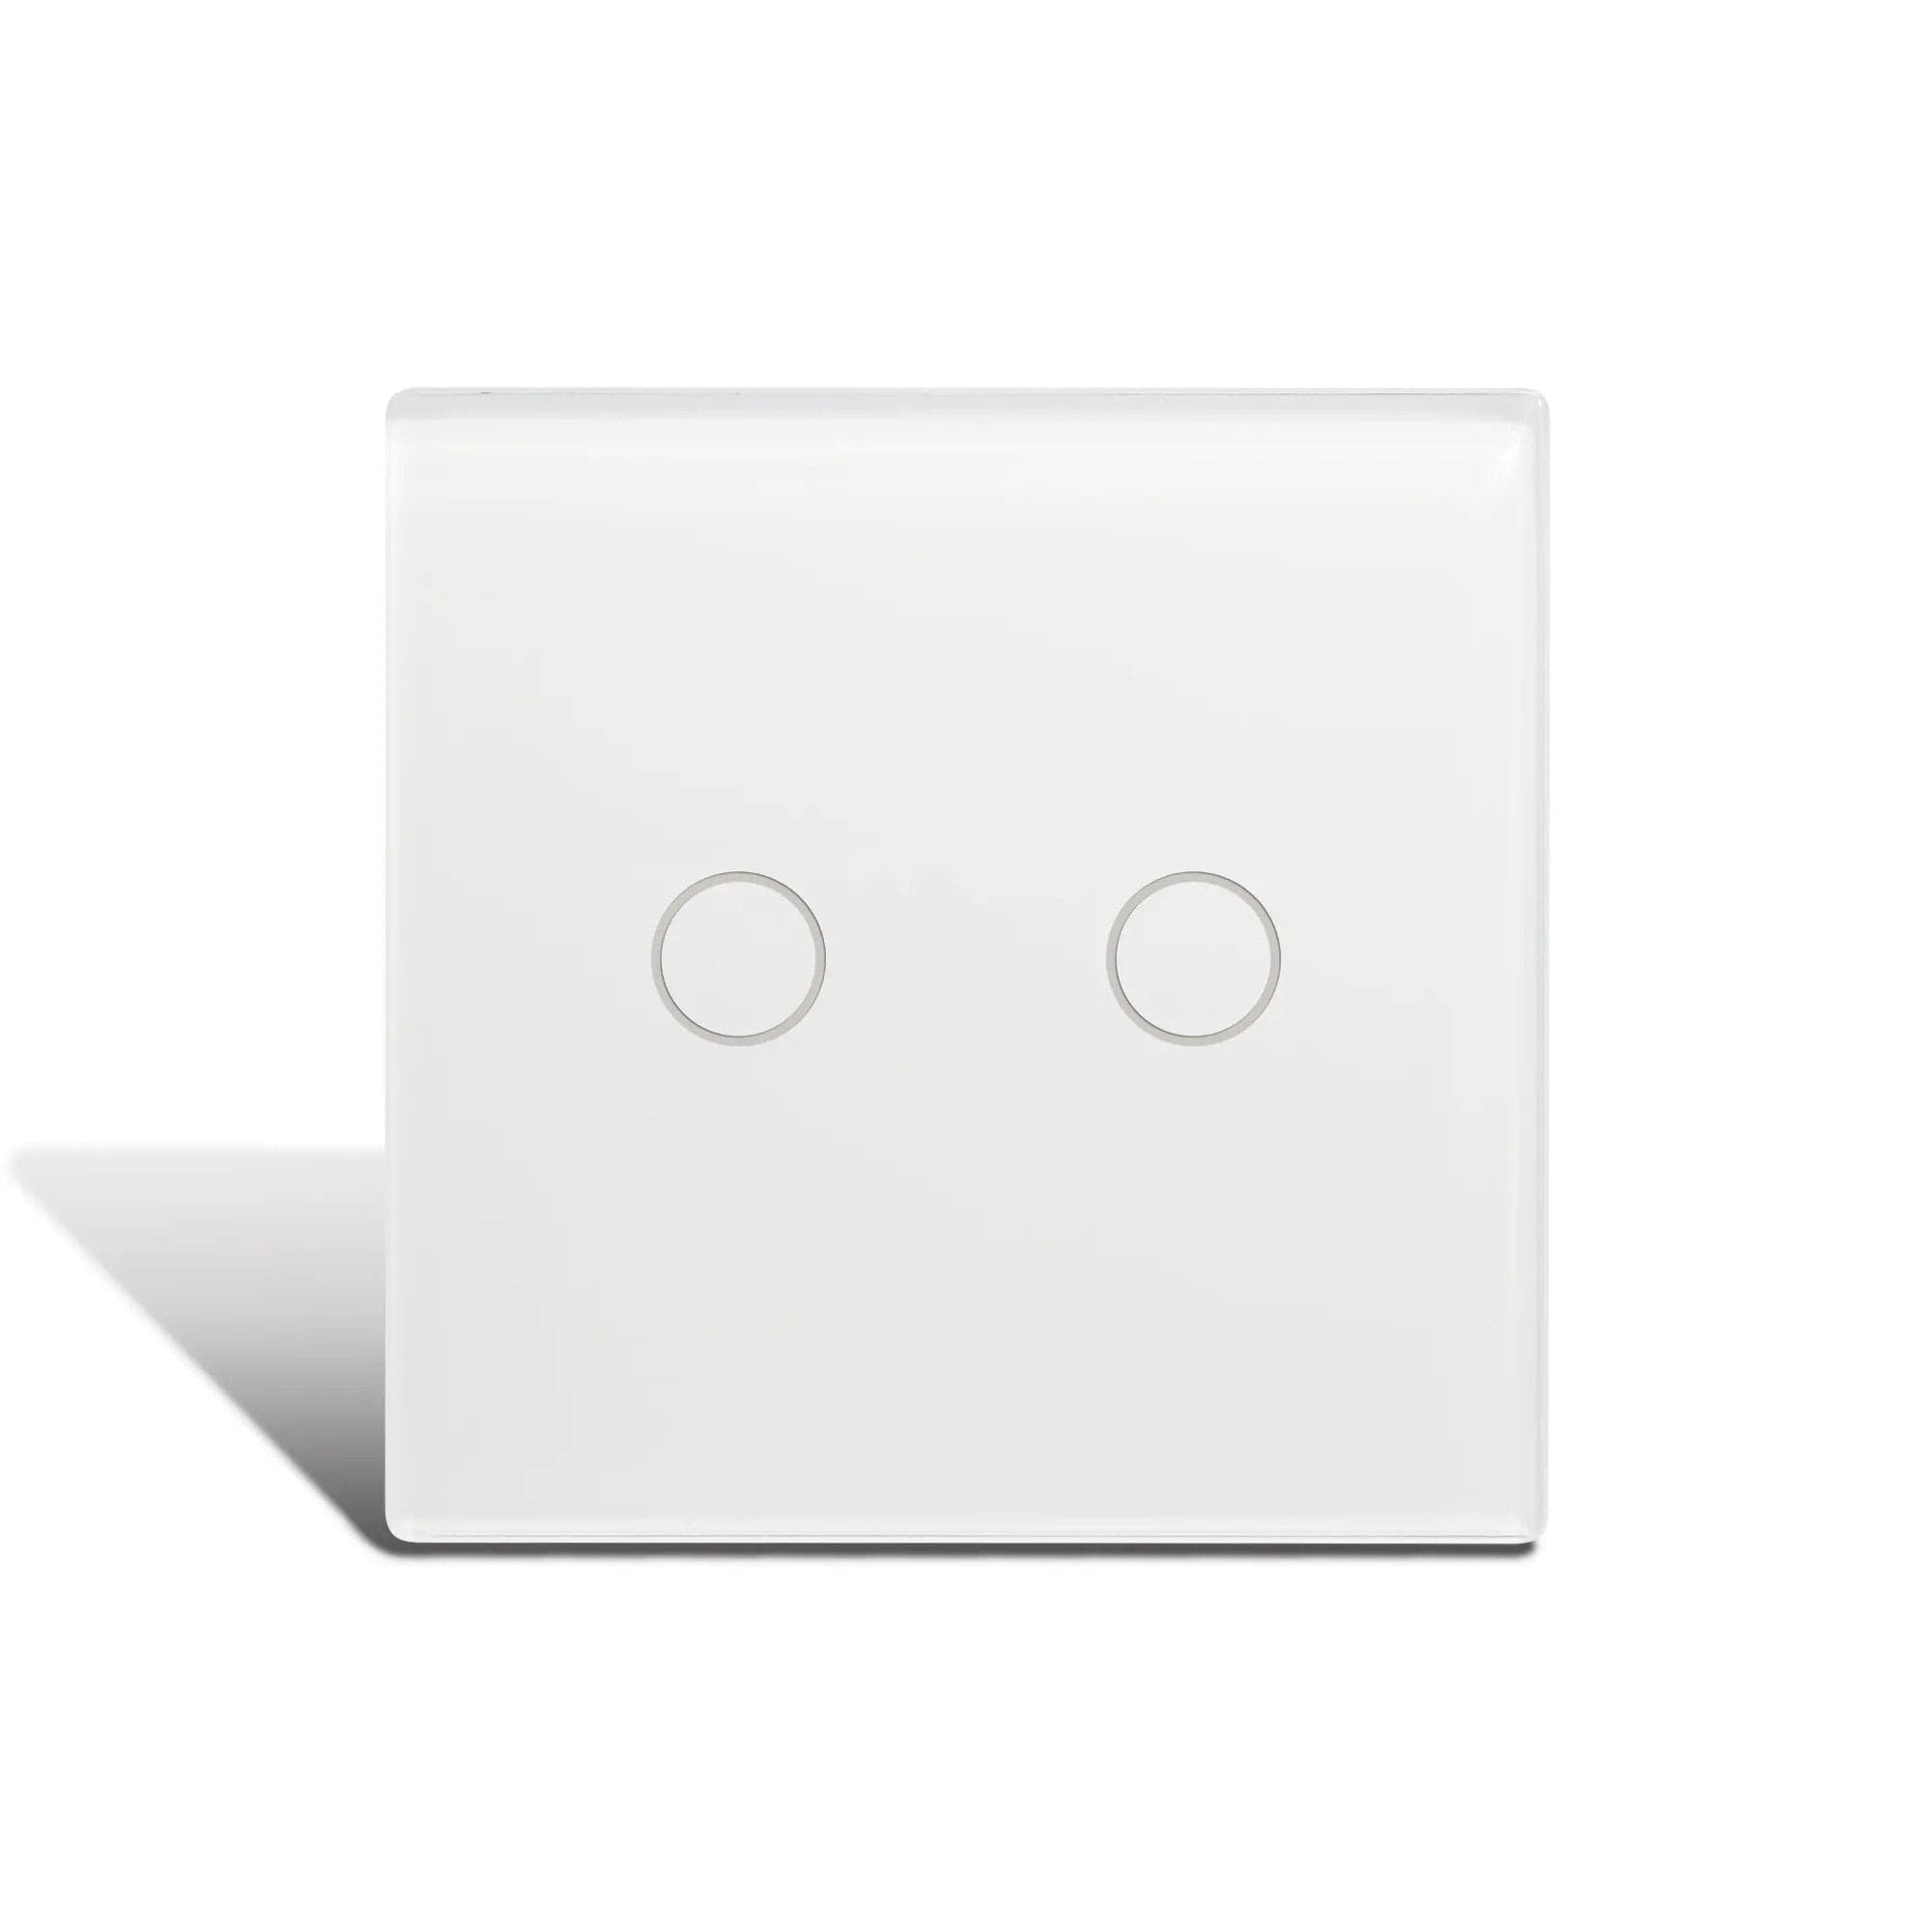 Smart Wi-Fi 2-Gang Light Switch | Supply Master | Accra, Ghana Switches & Sockets White Buy Tools hardware Building materials